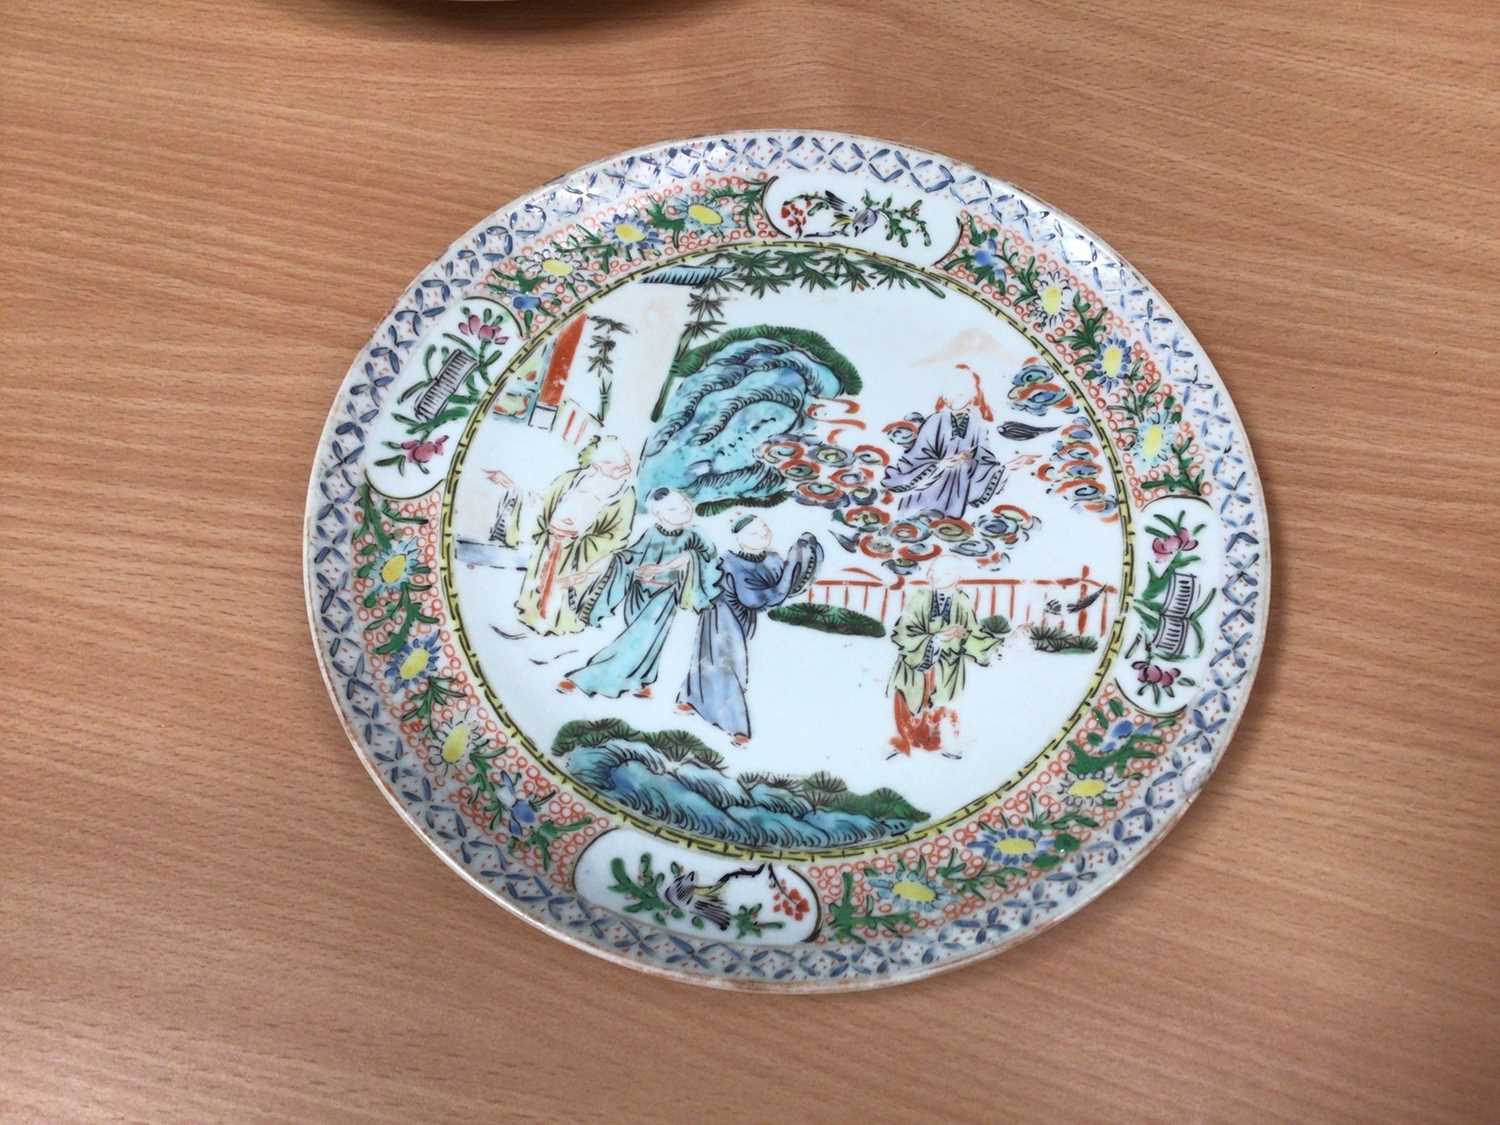 Six 19th century Chinese polychrome porcelain plates decorated with figures, birds and flowers - Image 3 of 12